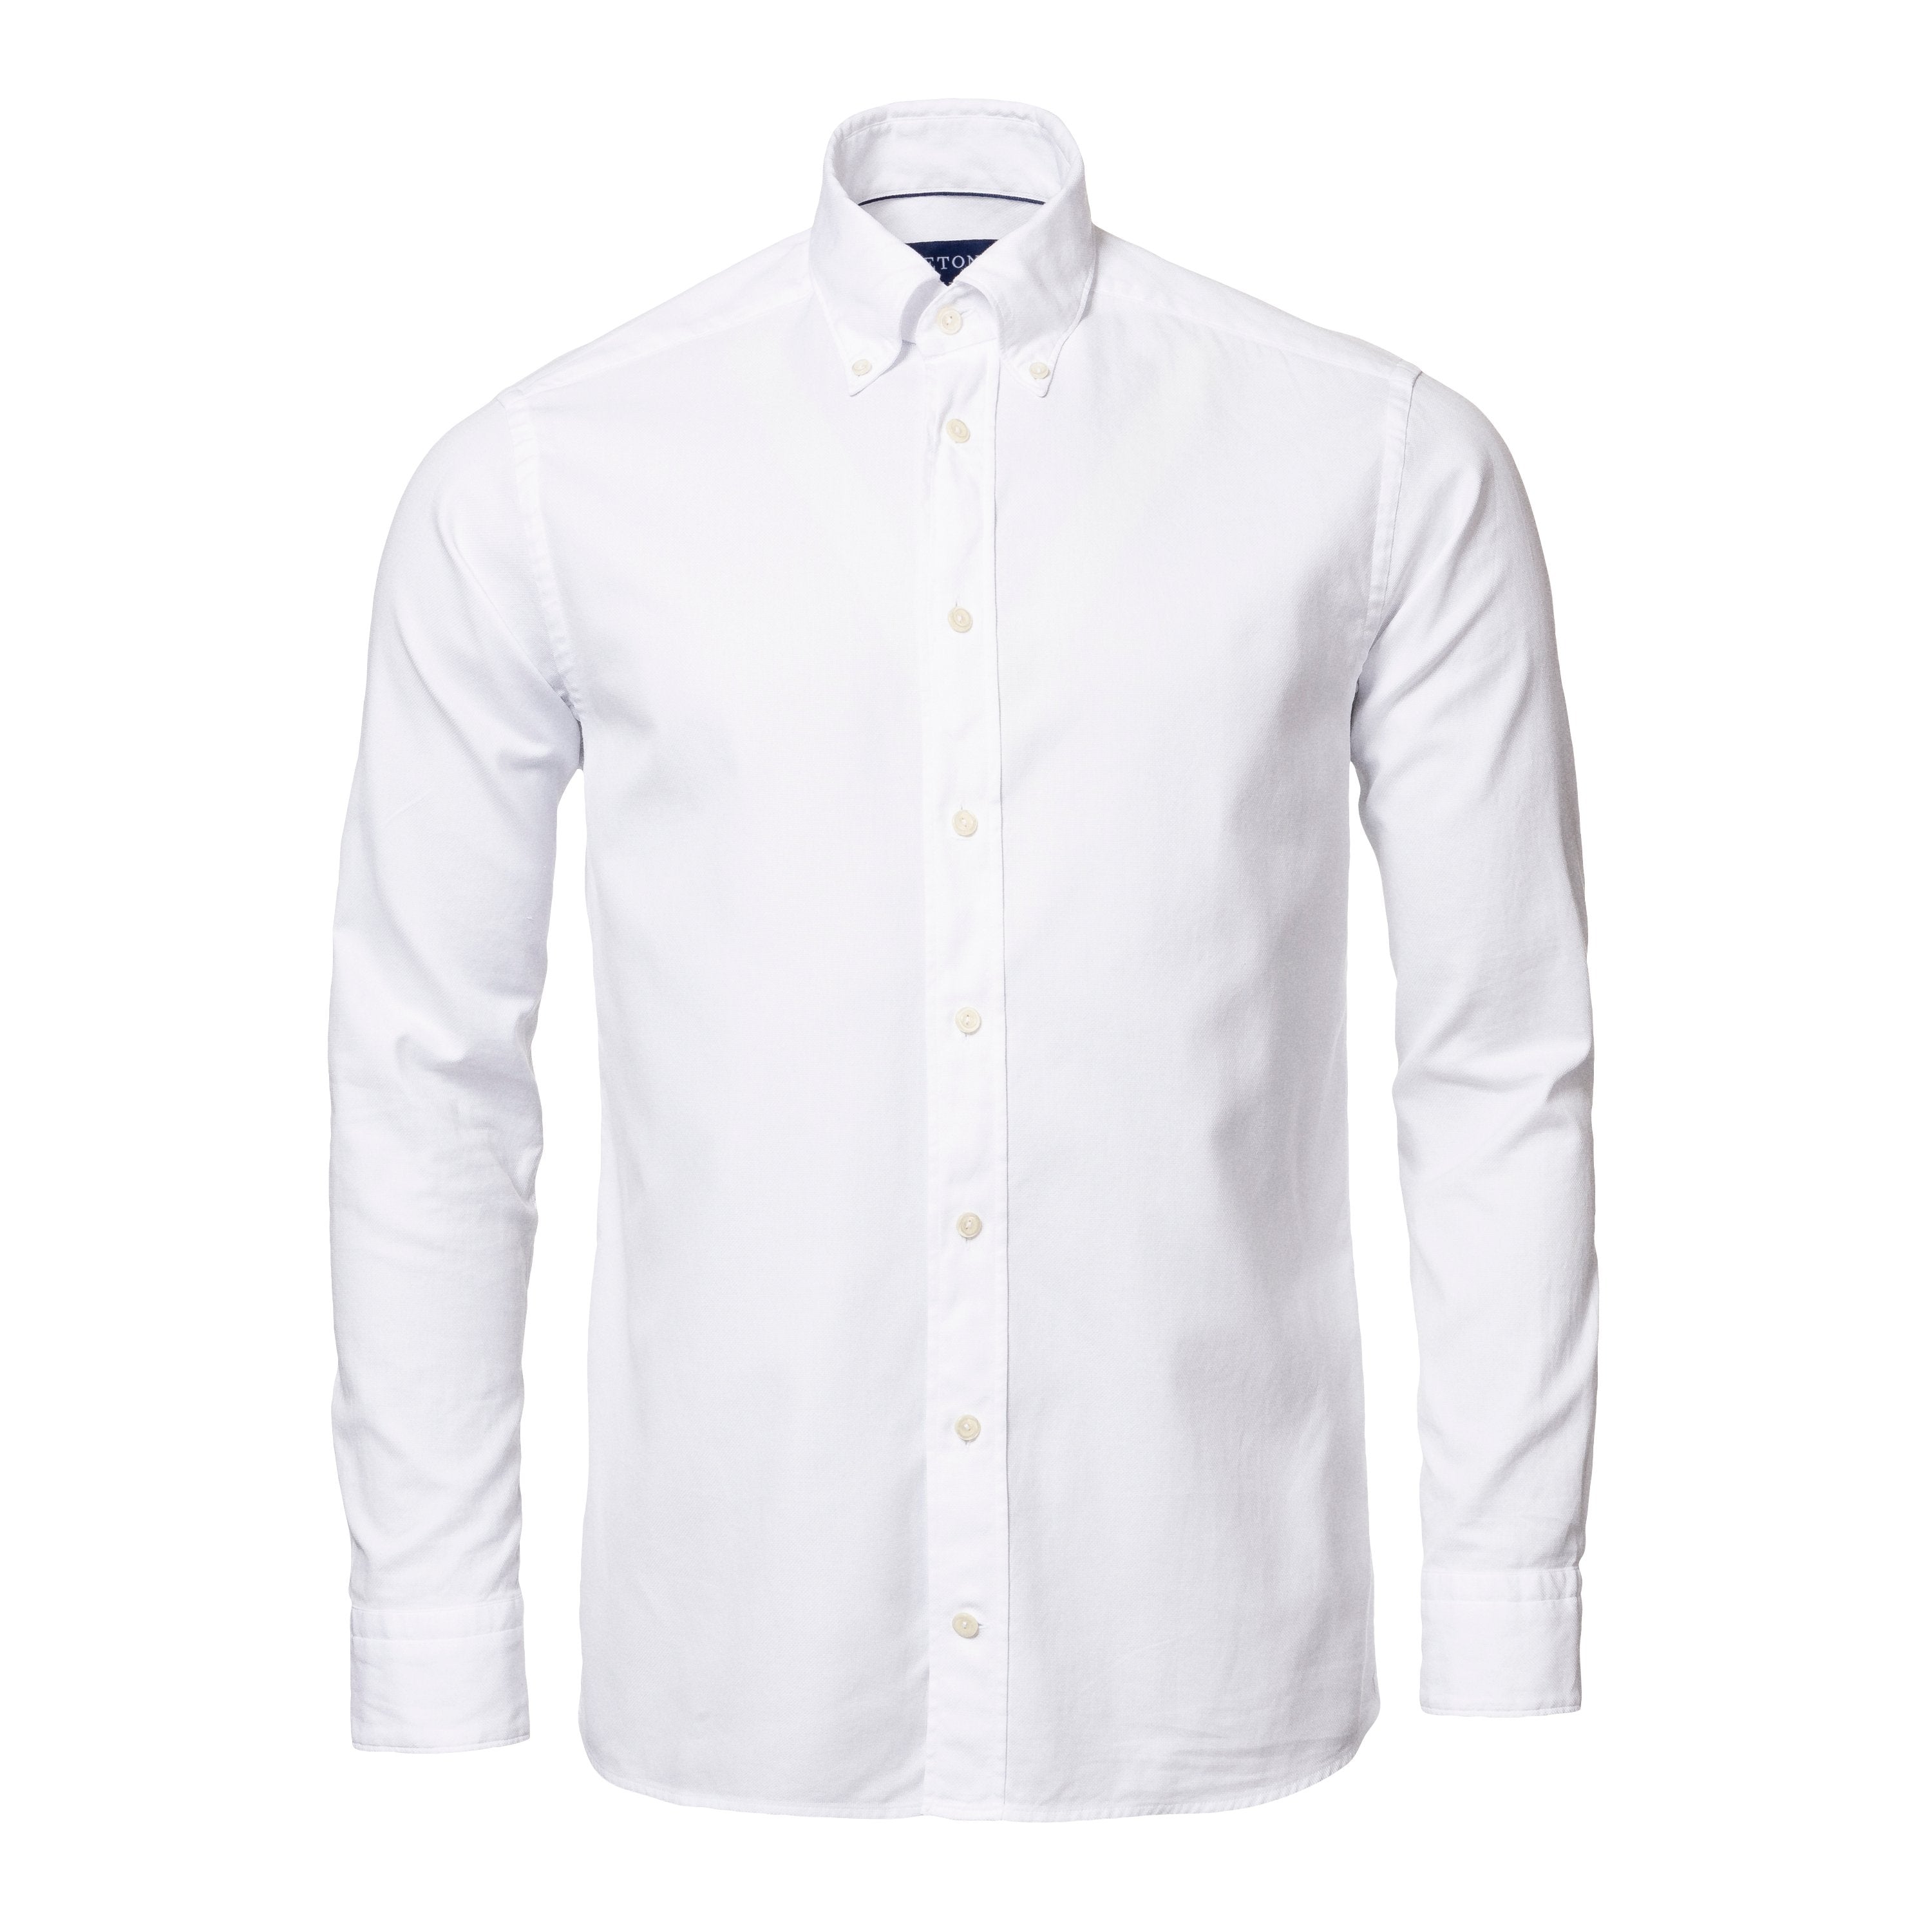 ETON - White CONTEMPORARY FIT Royal Oxford Shirt With Button Down Collar 93755939601